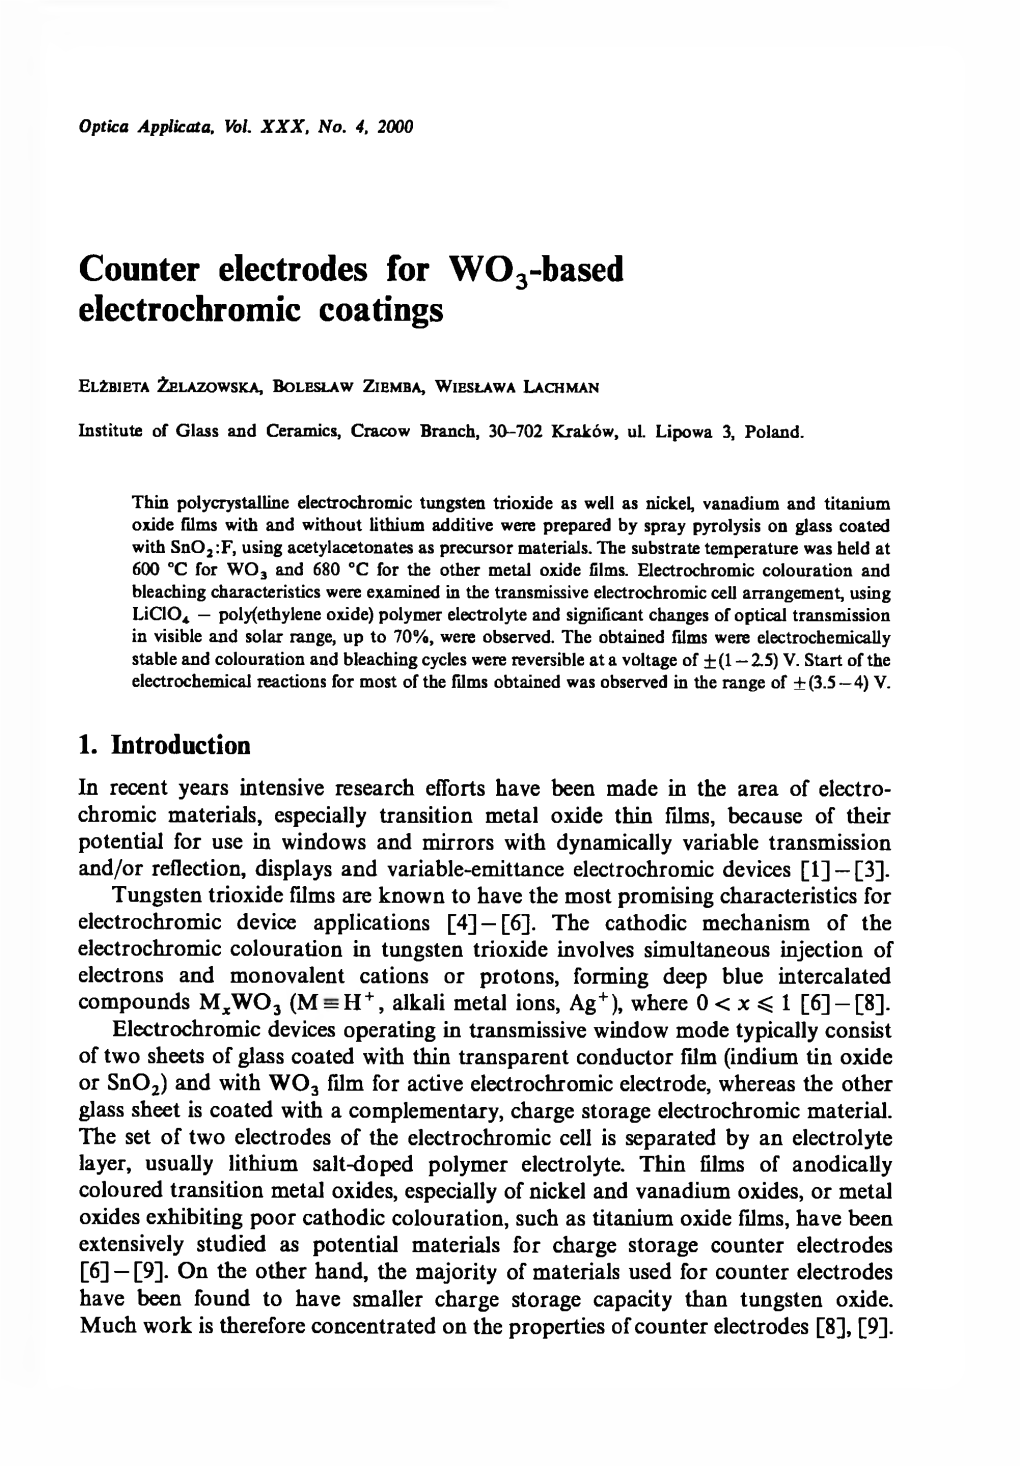 Counter Electrodes for W 03-Based Electrochromic Coatings 665 by Applying D.C